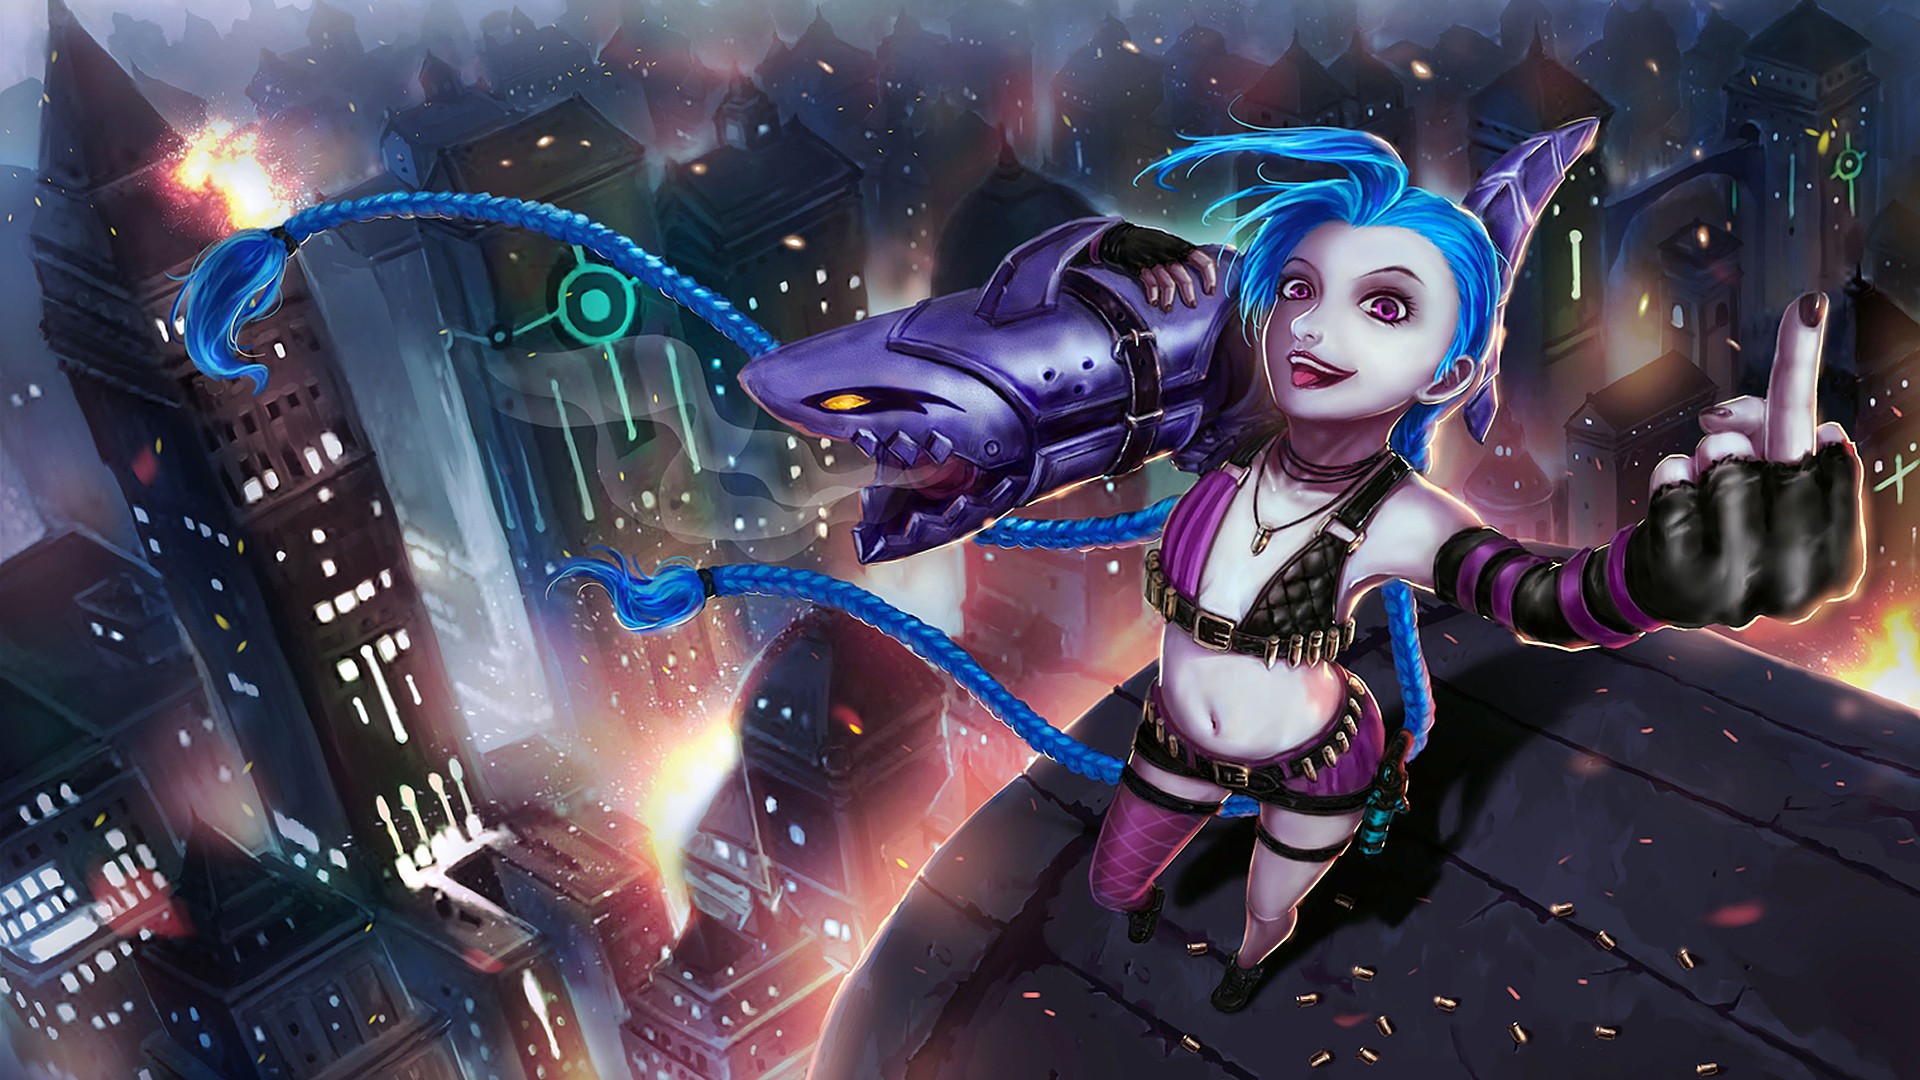 General 1920x1080 Jinx (League of Legends) city fantasy girl blue hair cityscape video games anime girls missing sock belly League of Legends PC gaming tongues tongue out middle finger video game art video game girls video game characters